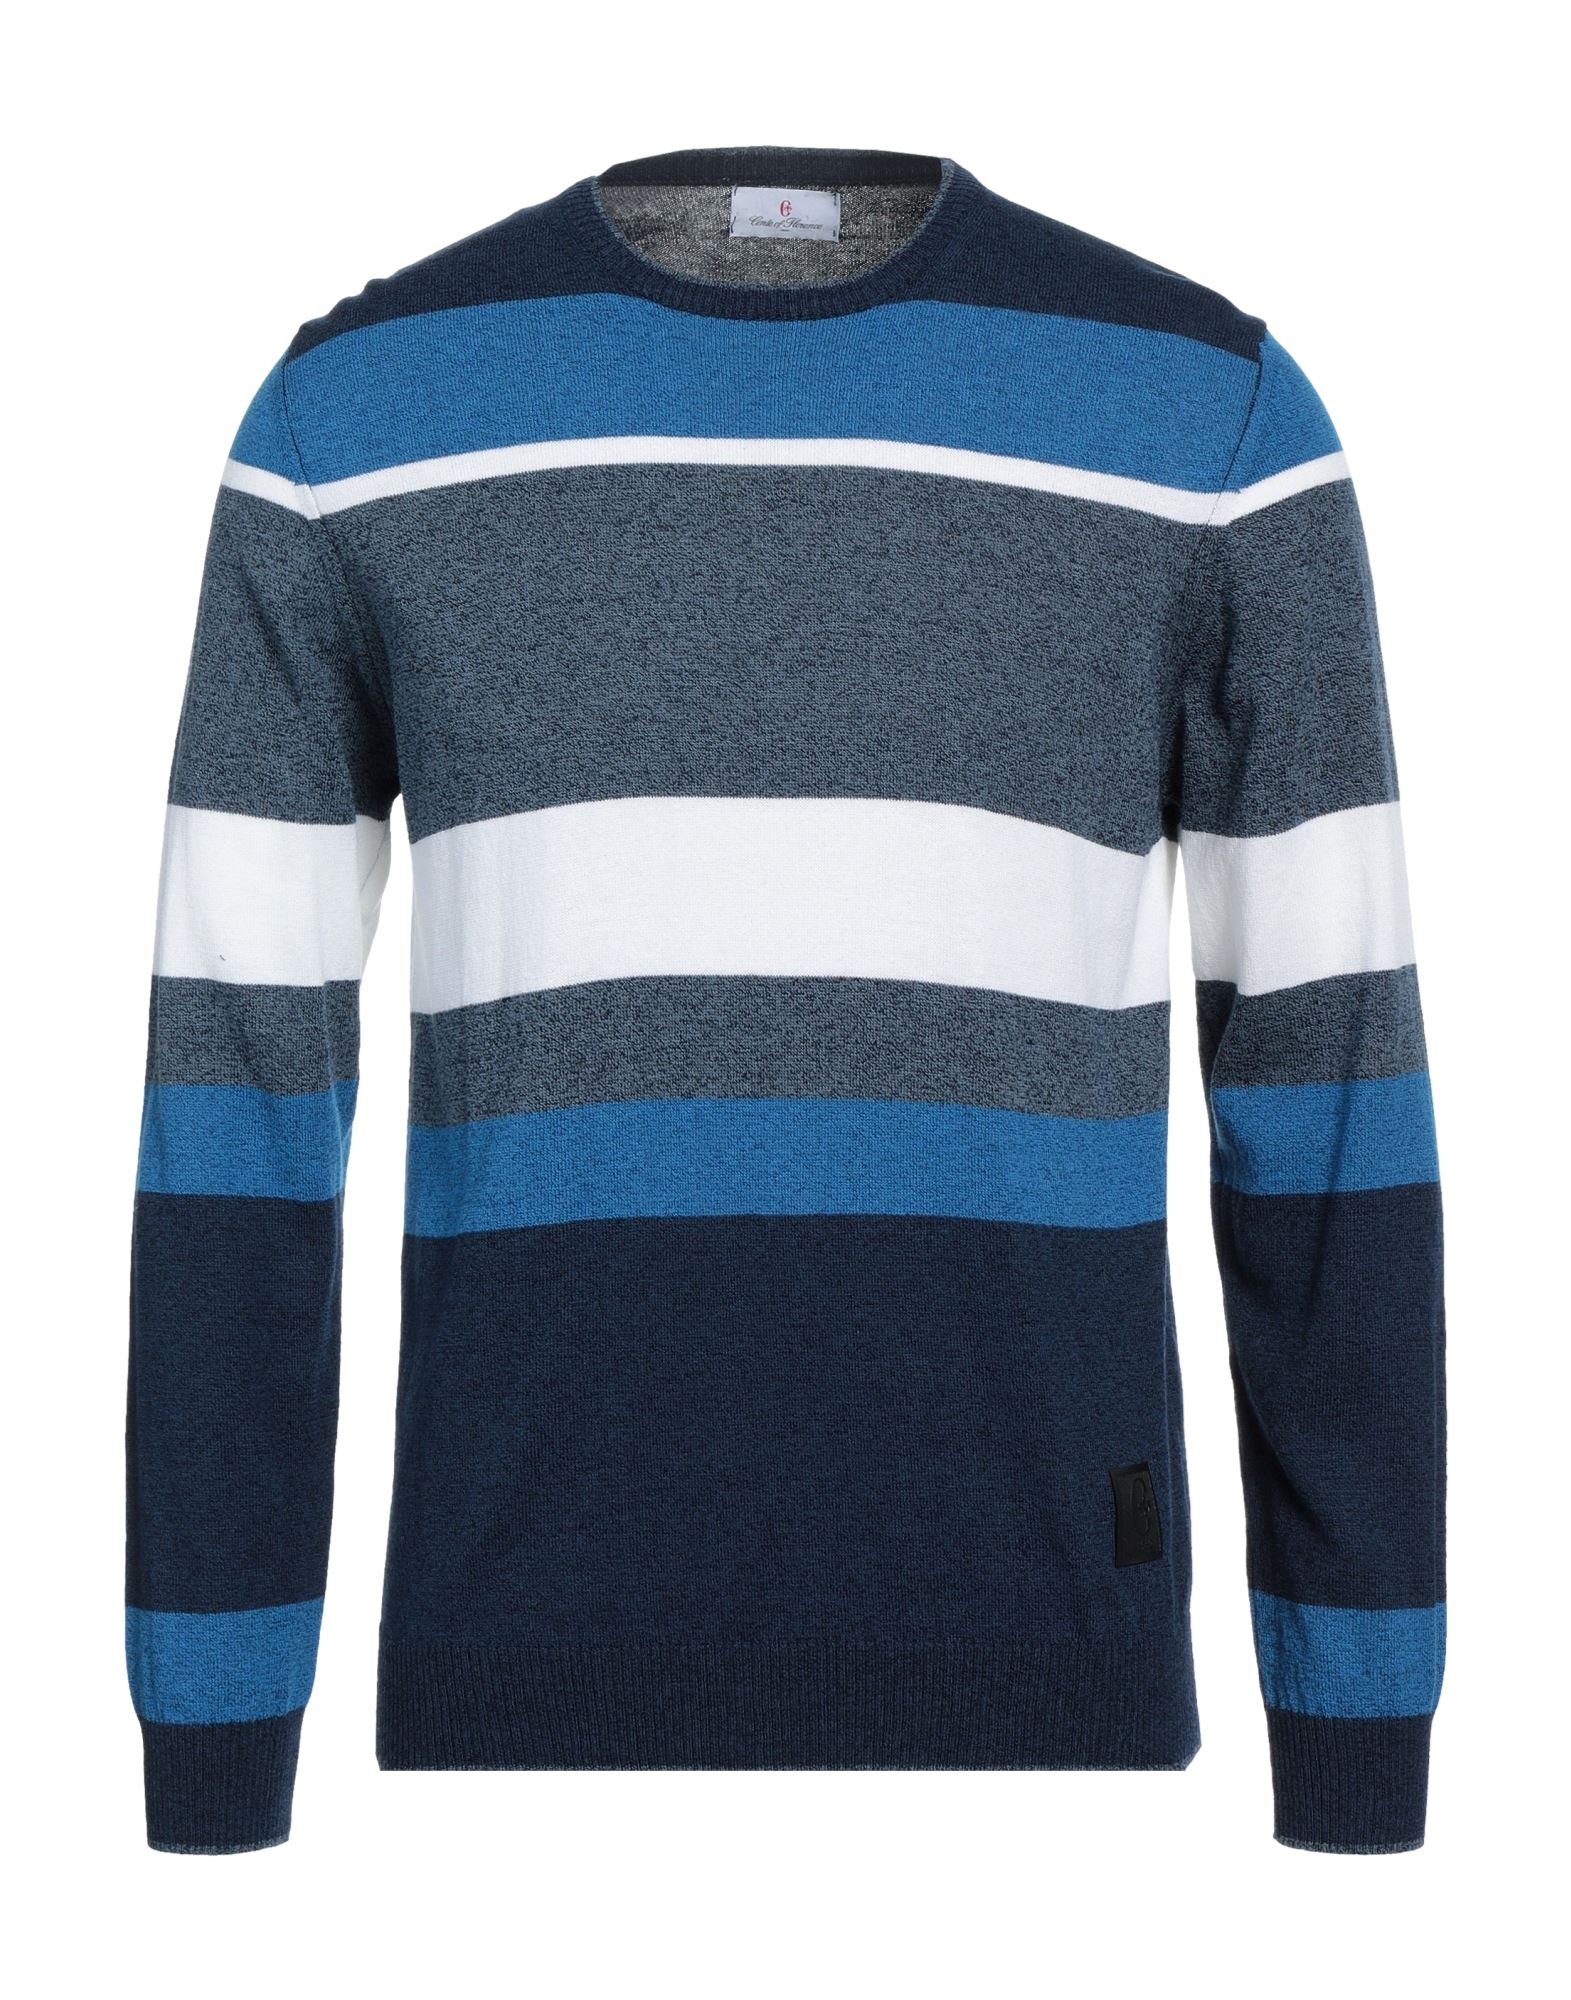 CONTE OF FLORENCE CONTE OF FLORENCE MAN SWEATER BLUE SIZE S COTTON, ACRYLIC